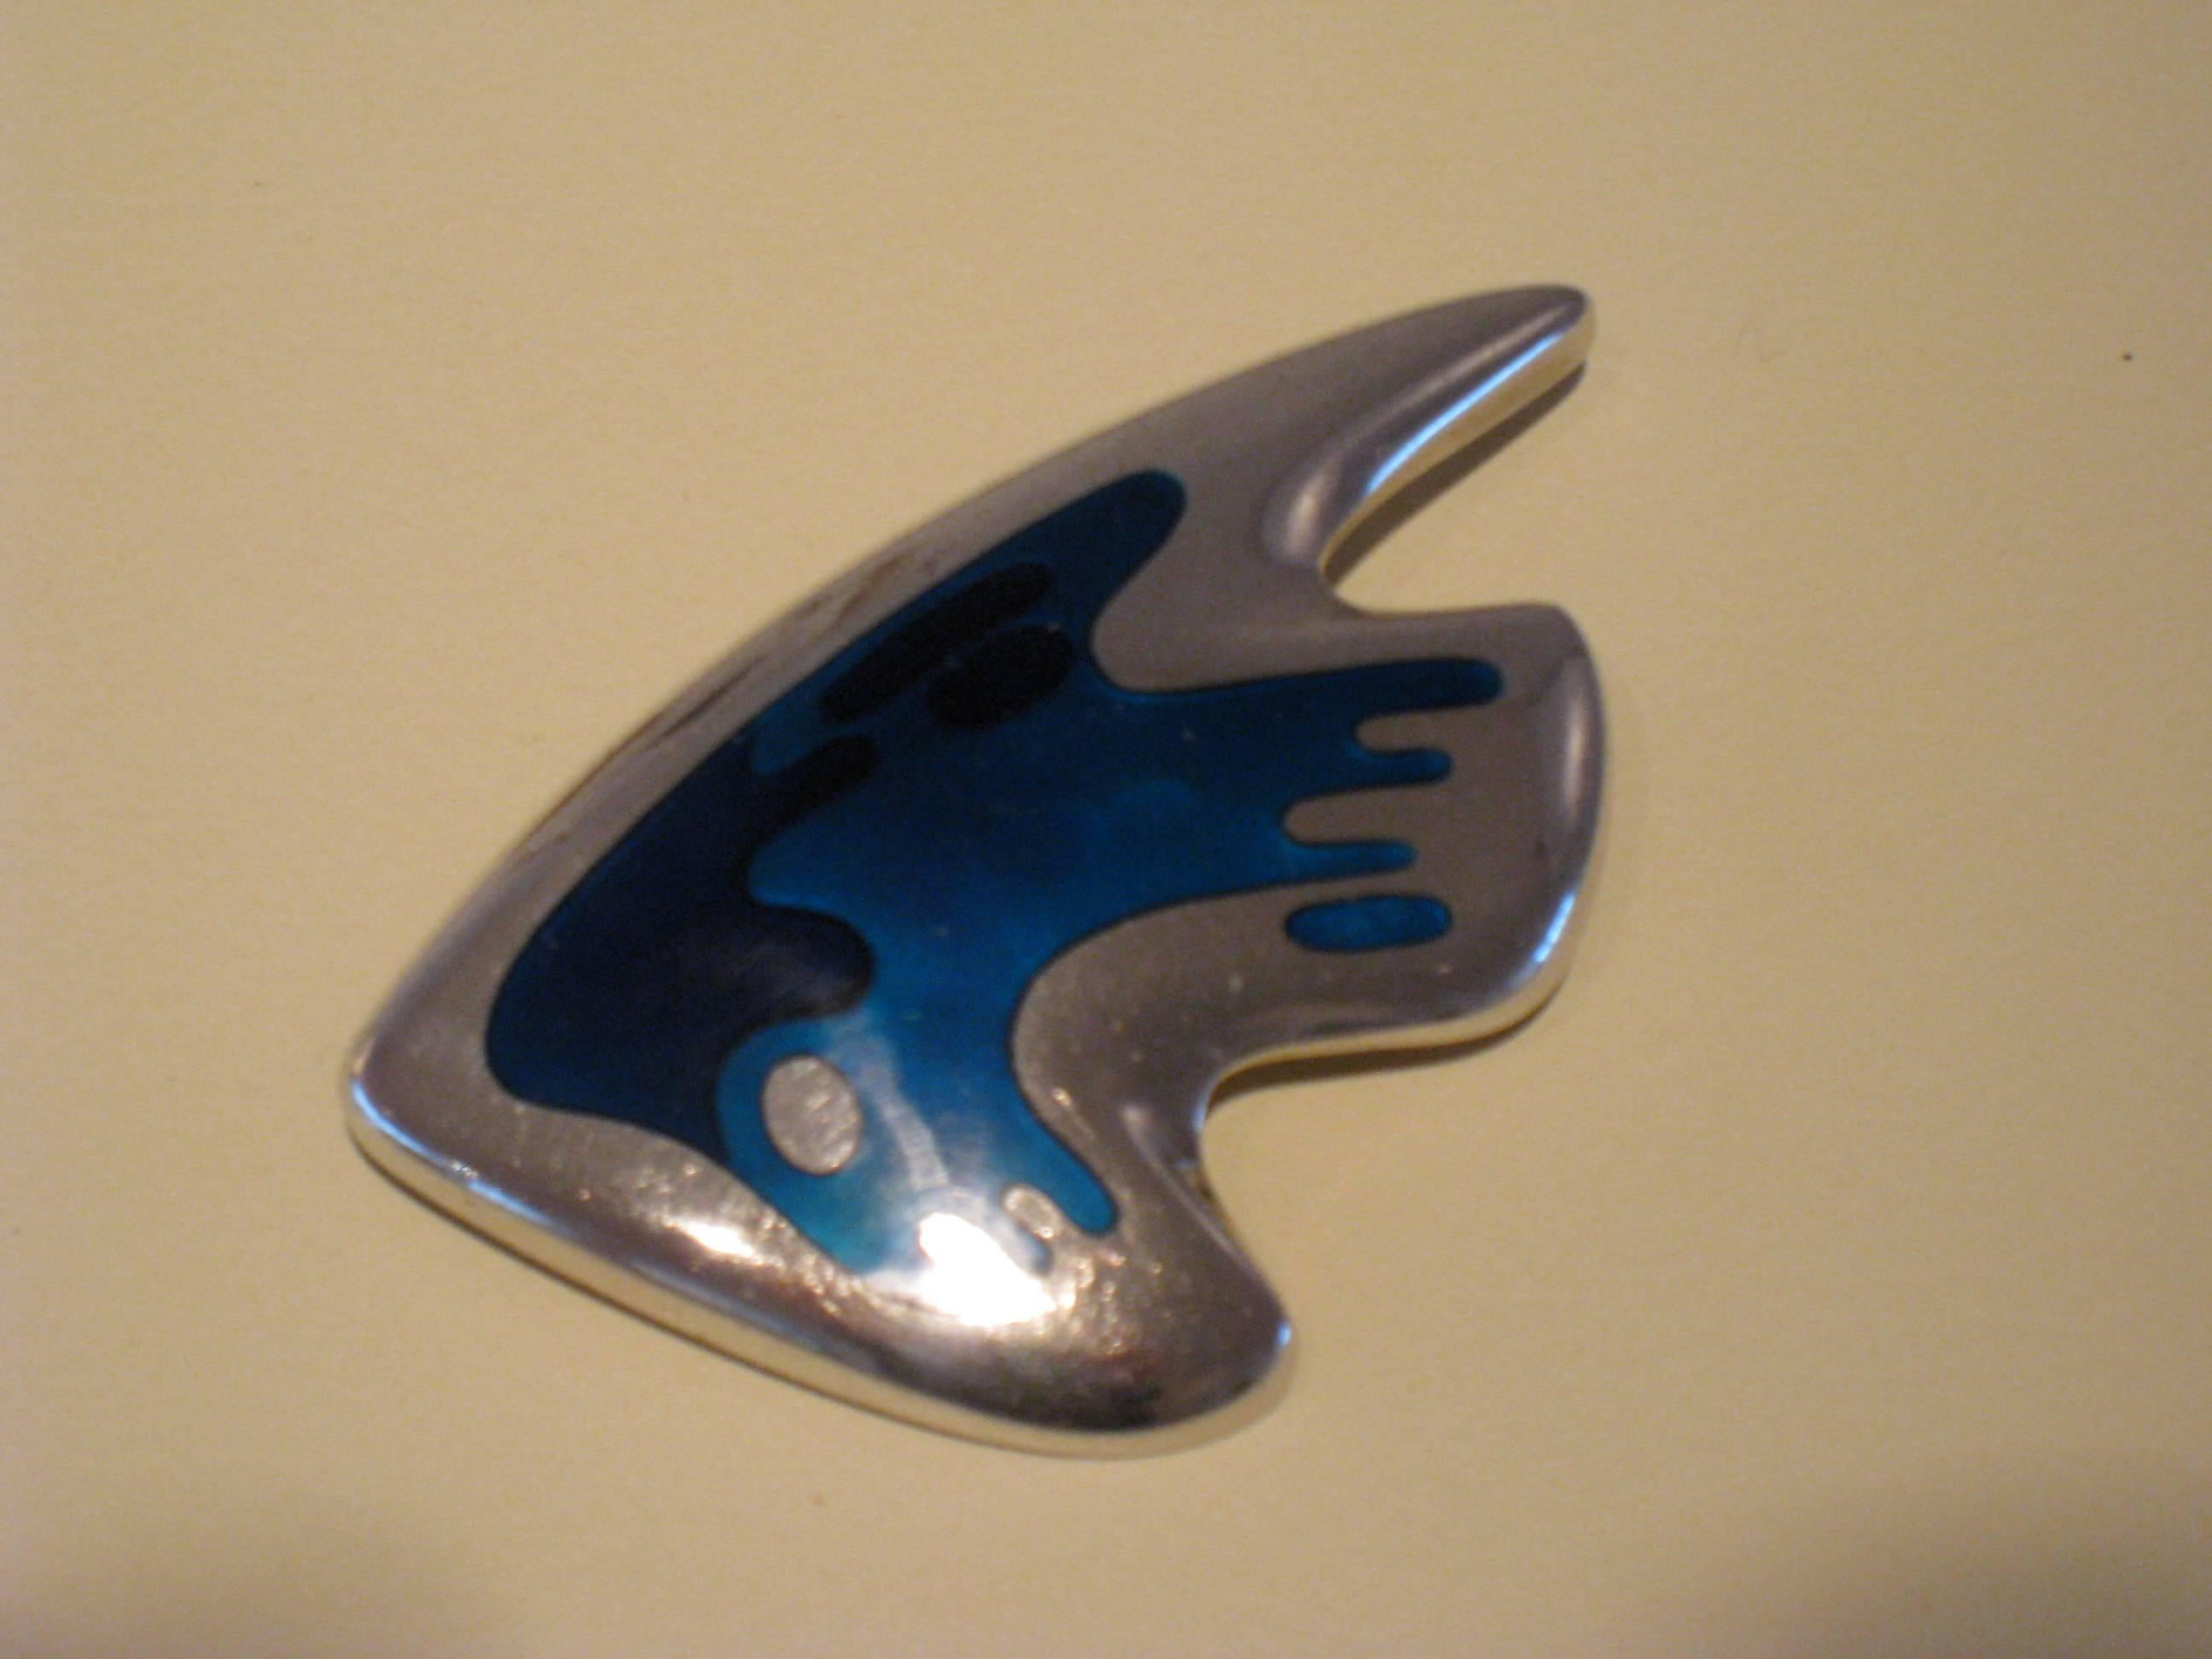 For Georg Jensen, late 1940s-early 1950s
sterling silver, with shaded blue enamel 
Stamped marks and '307'.